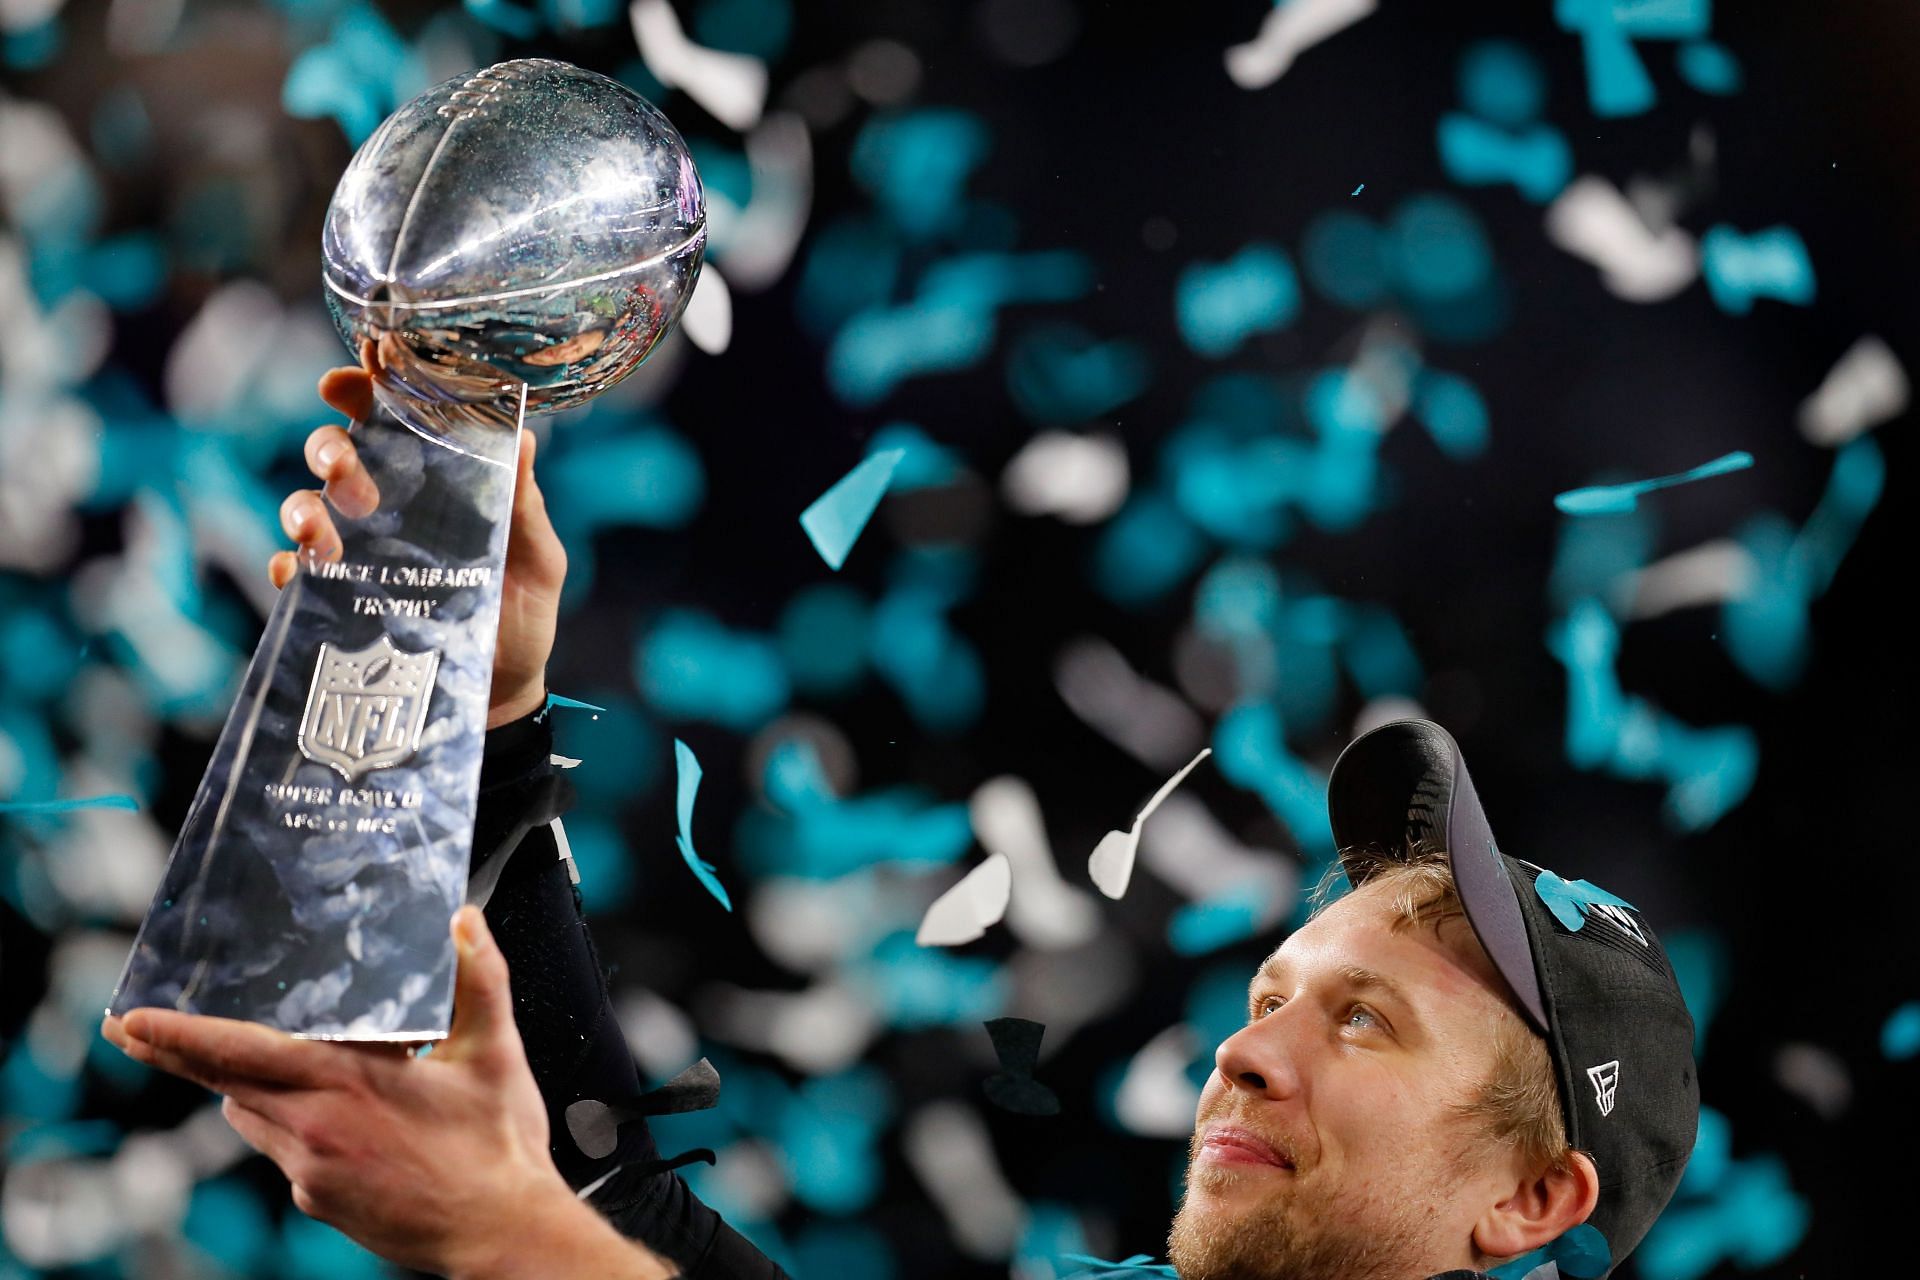 Philly Philly! 3rdanniversary of Philadelphia Eagles, Nick Foles